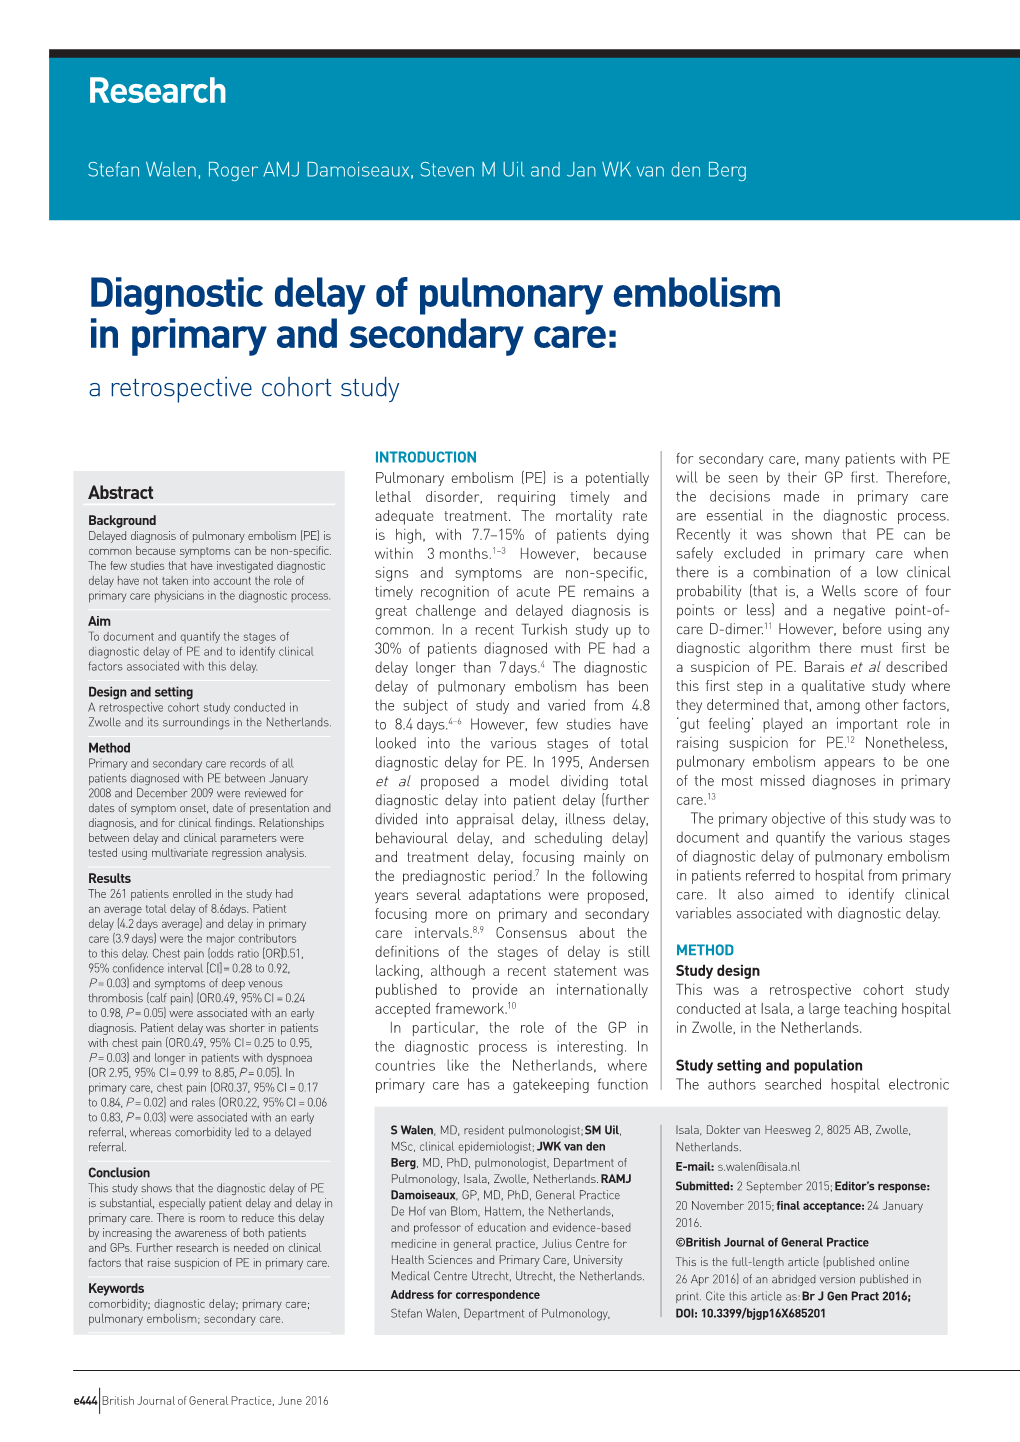 Diagnostic Delay of Pulmonary Embolism in Primary and Secondary Care: a Retrospective Cohort Study